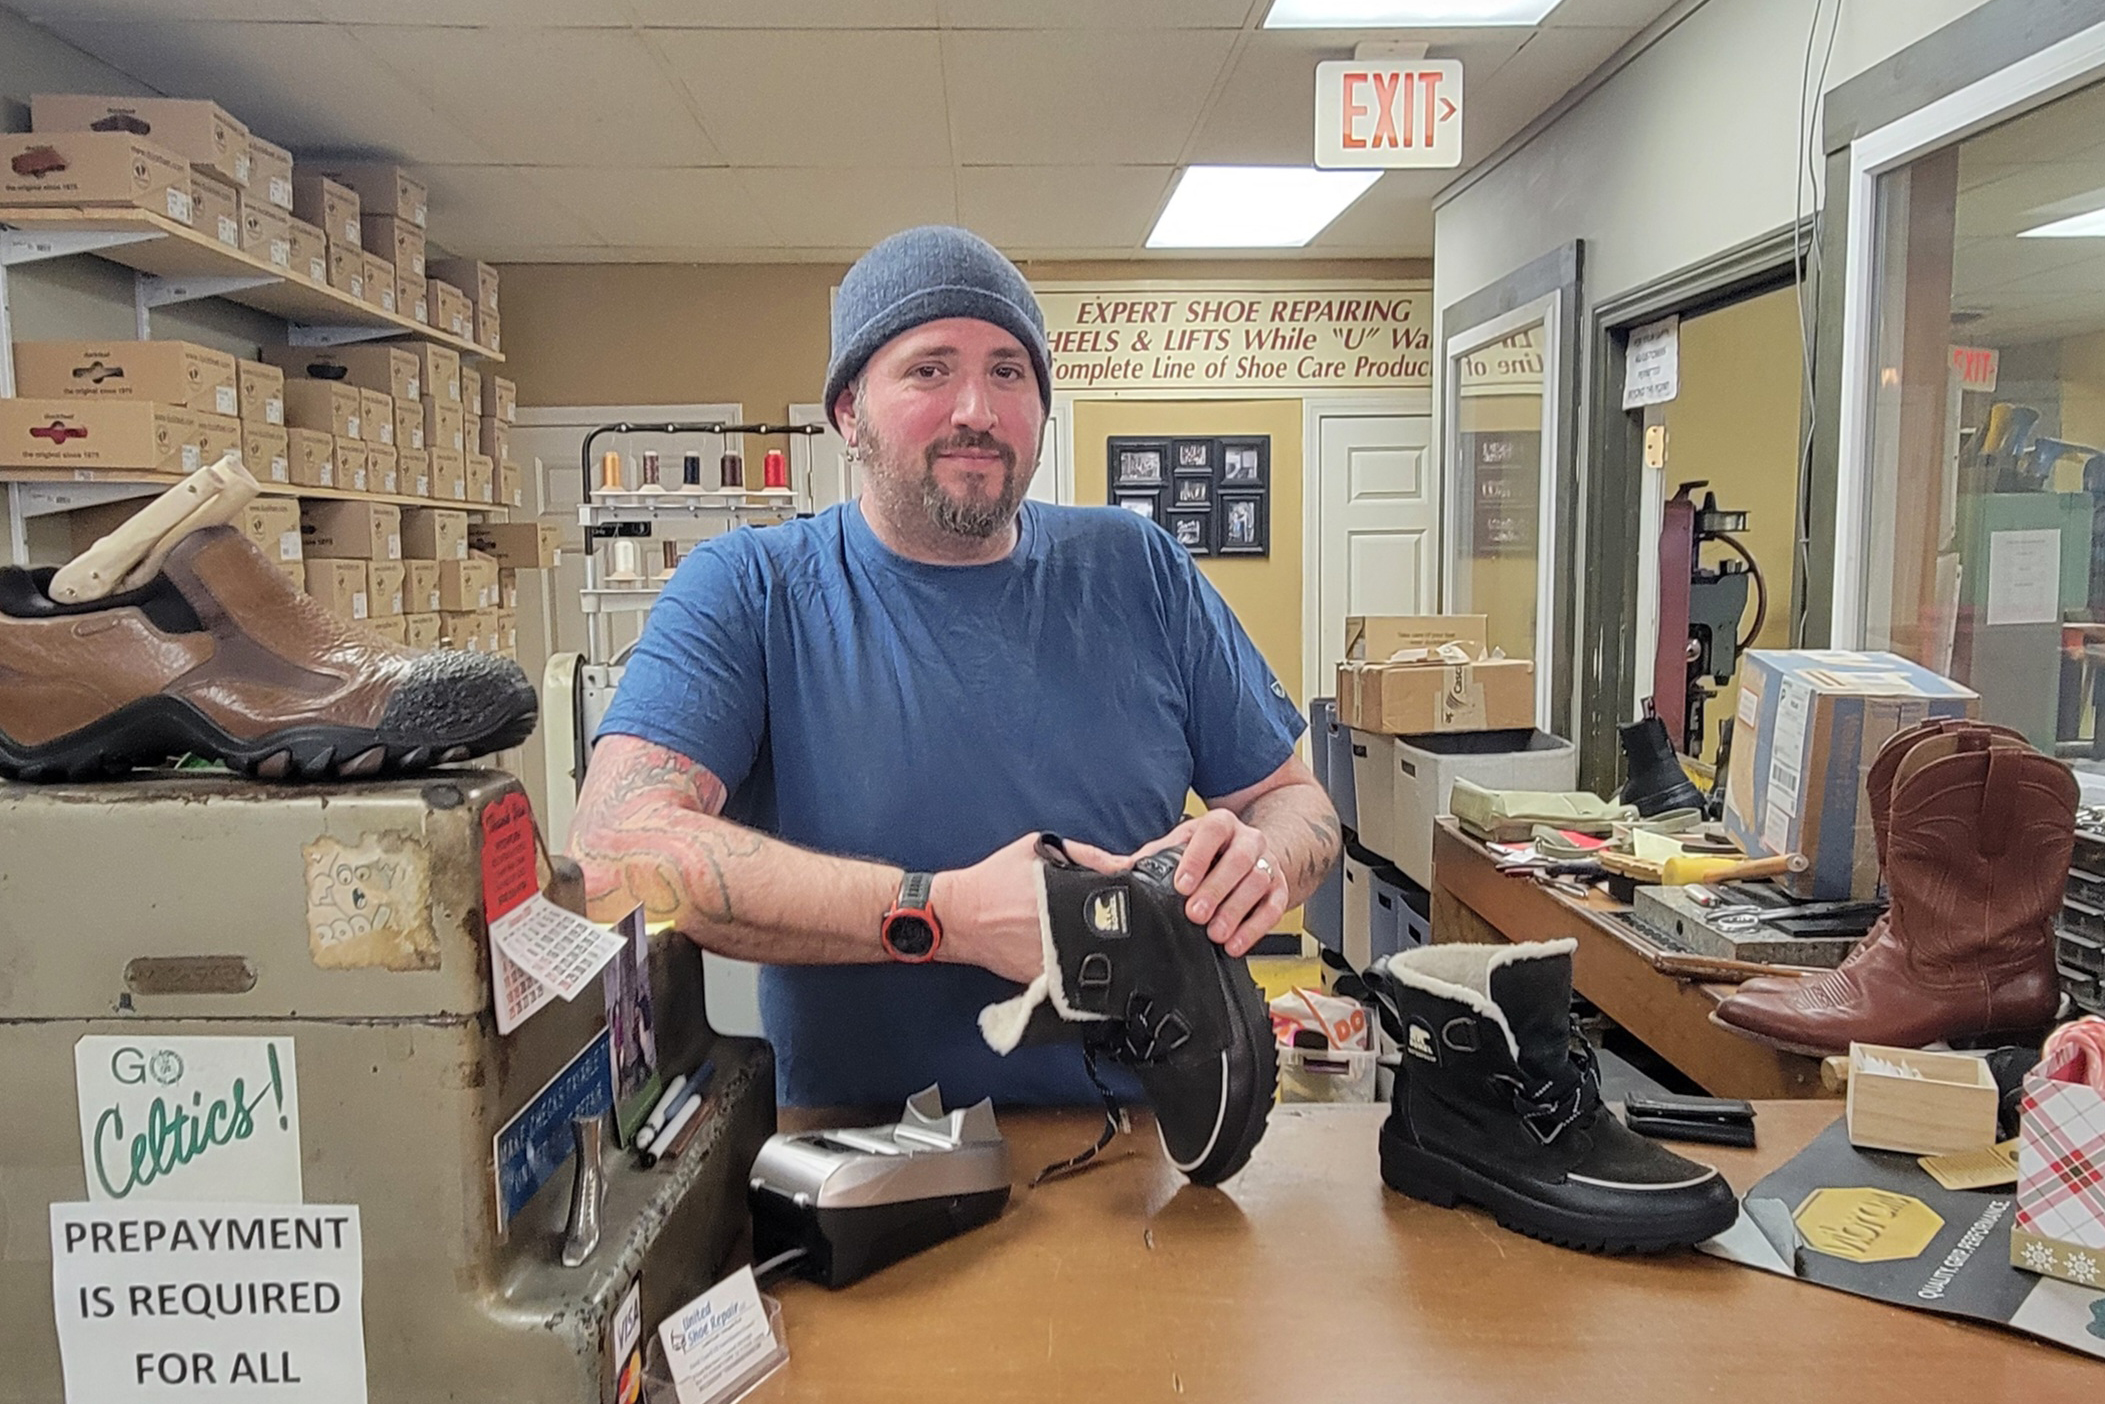 healthy living A man wearing a beanie holds a pair of shoes inside a shoe repair store